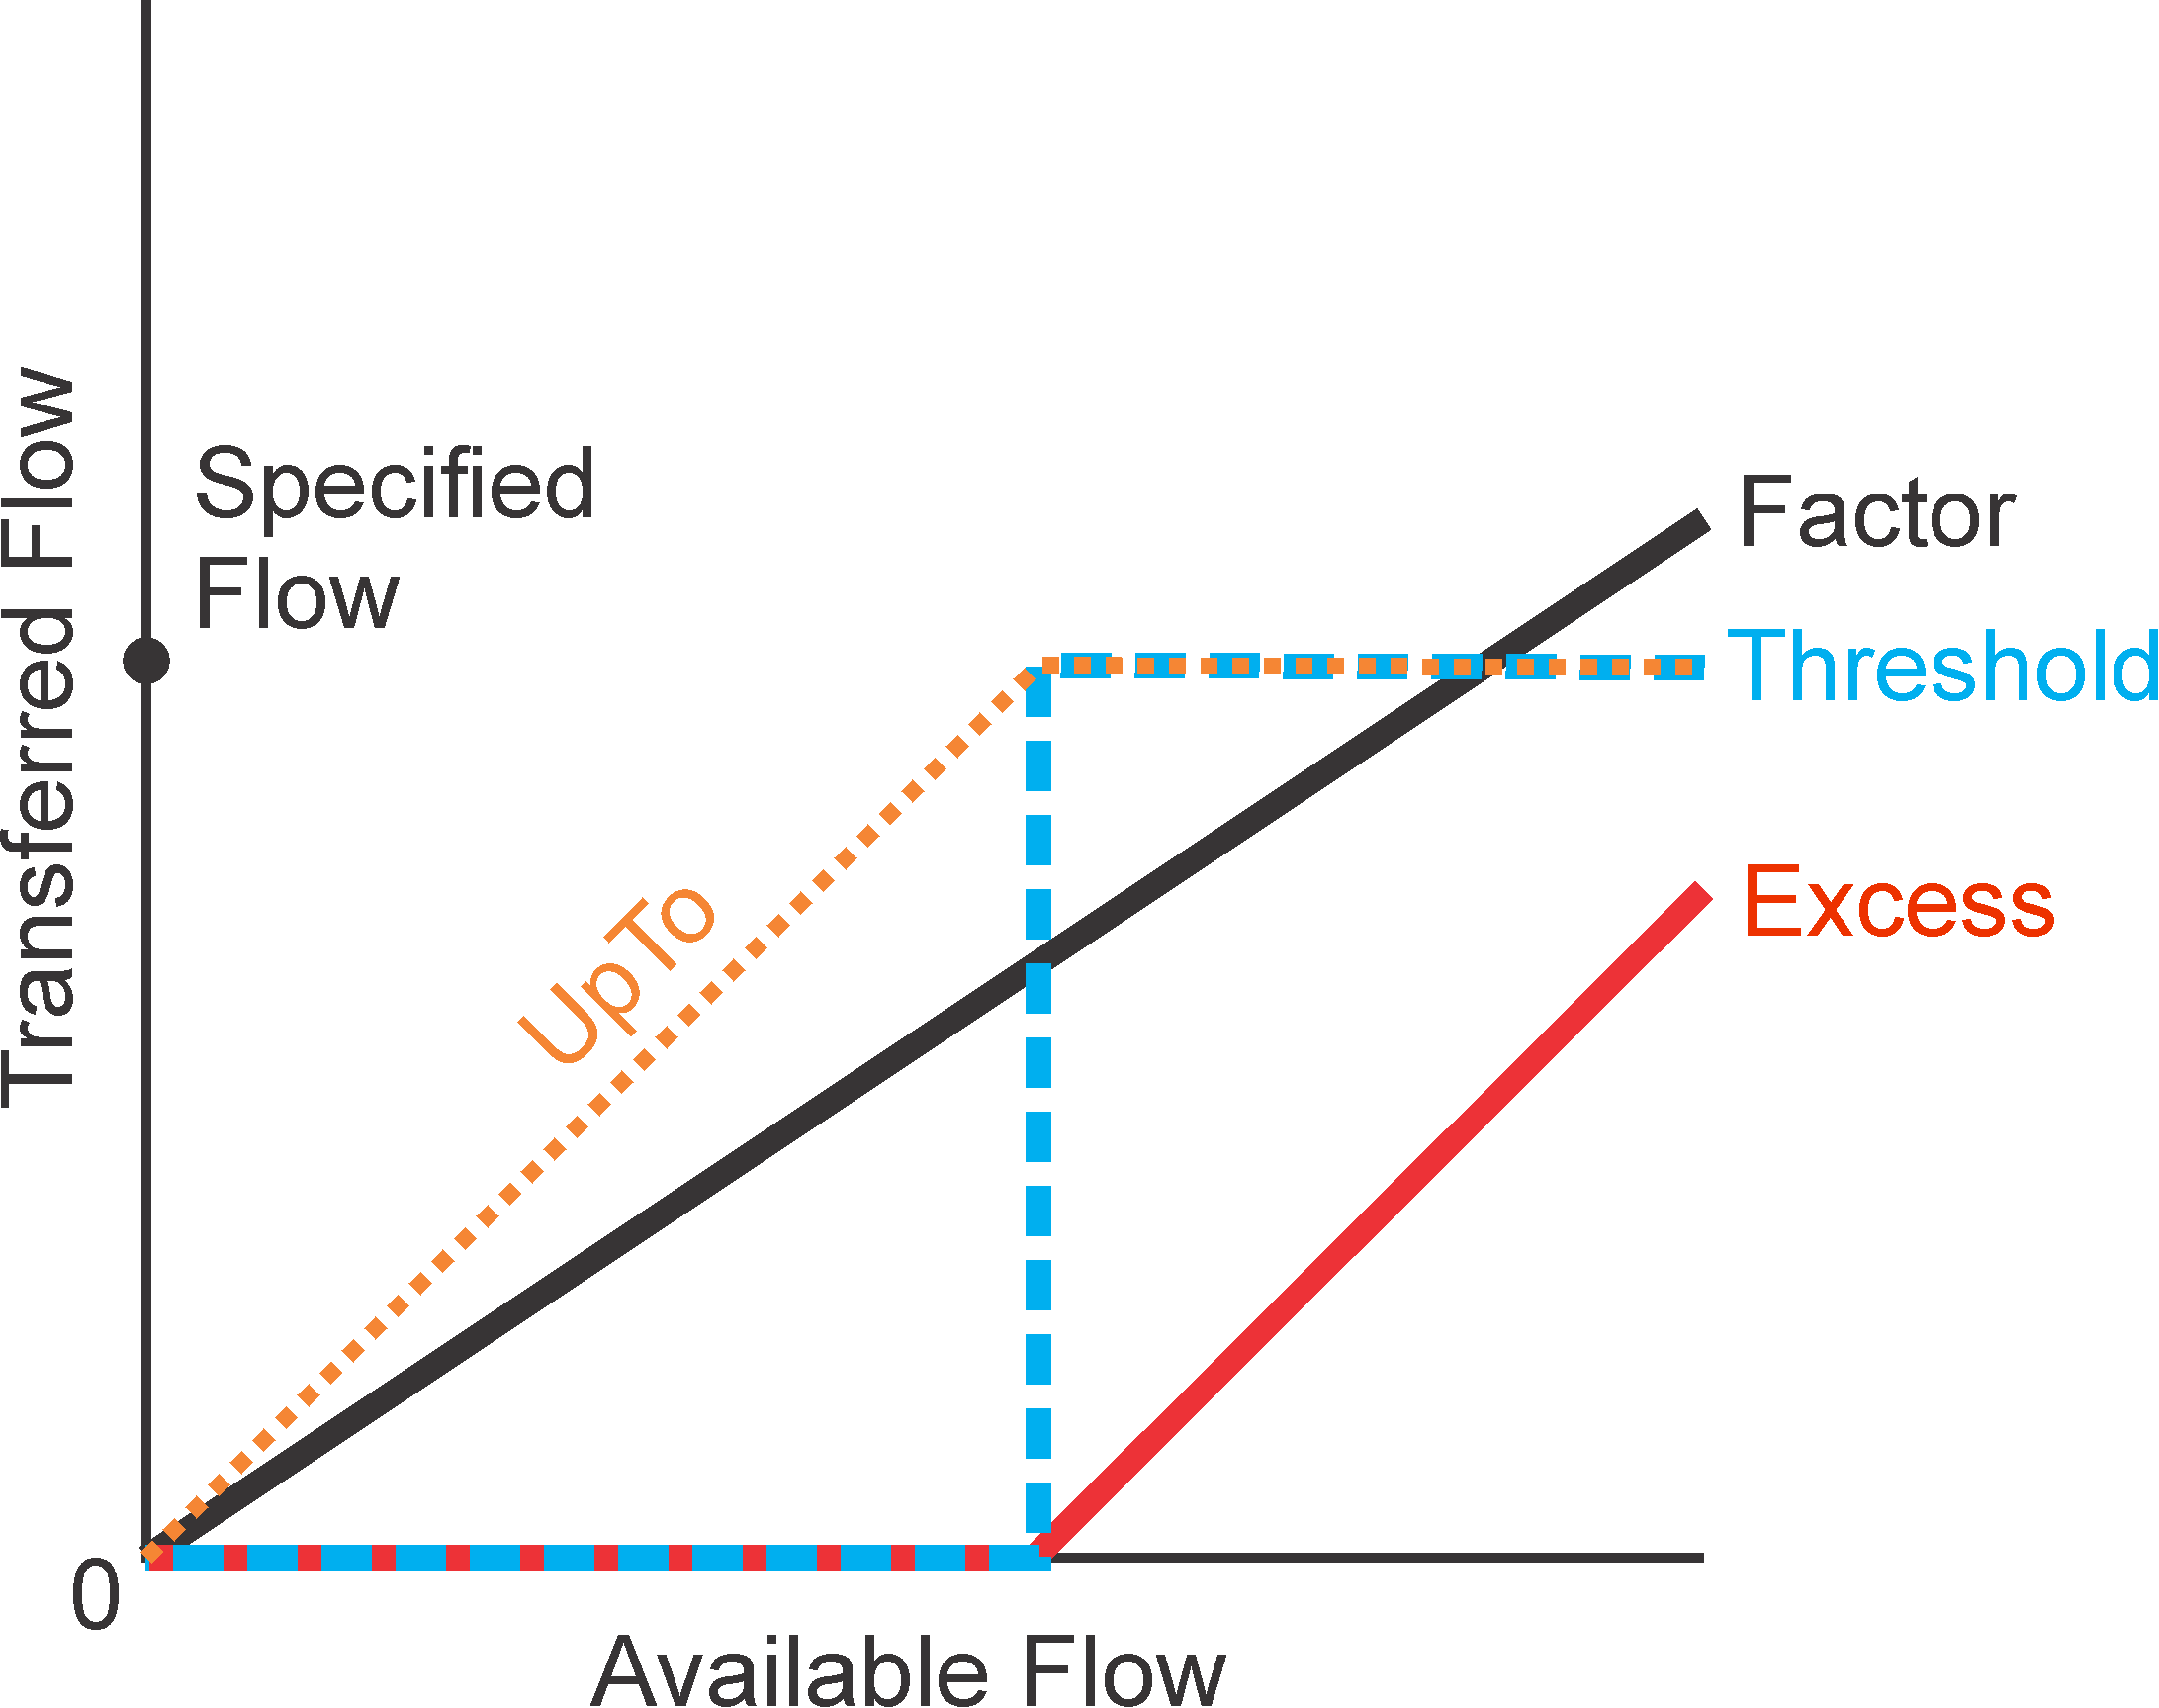 Illustration of the effect of Mover Type on flow in MVR package